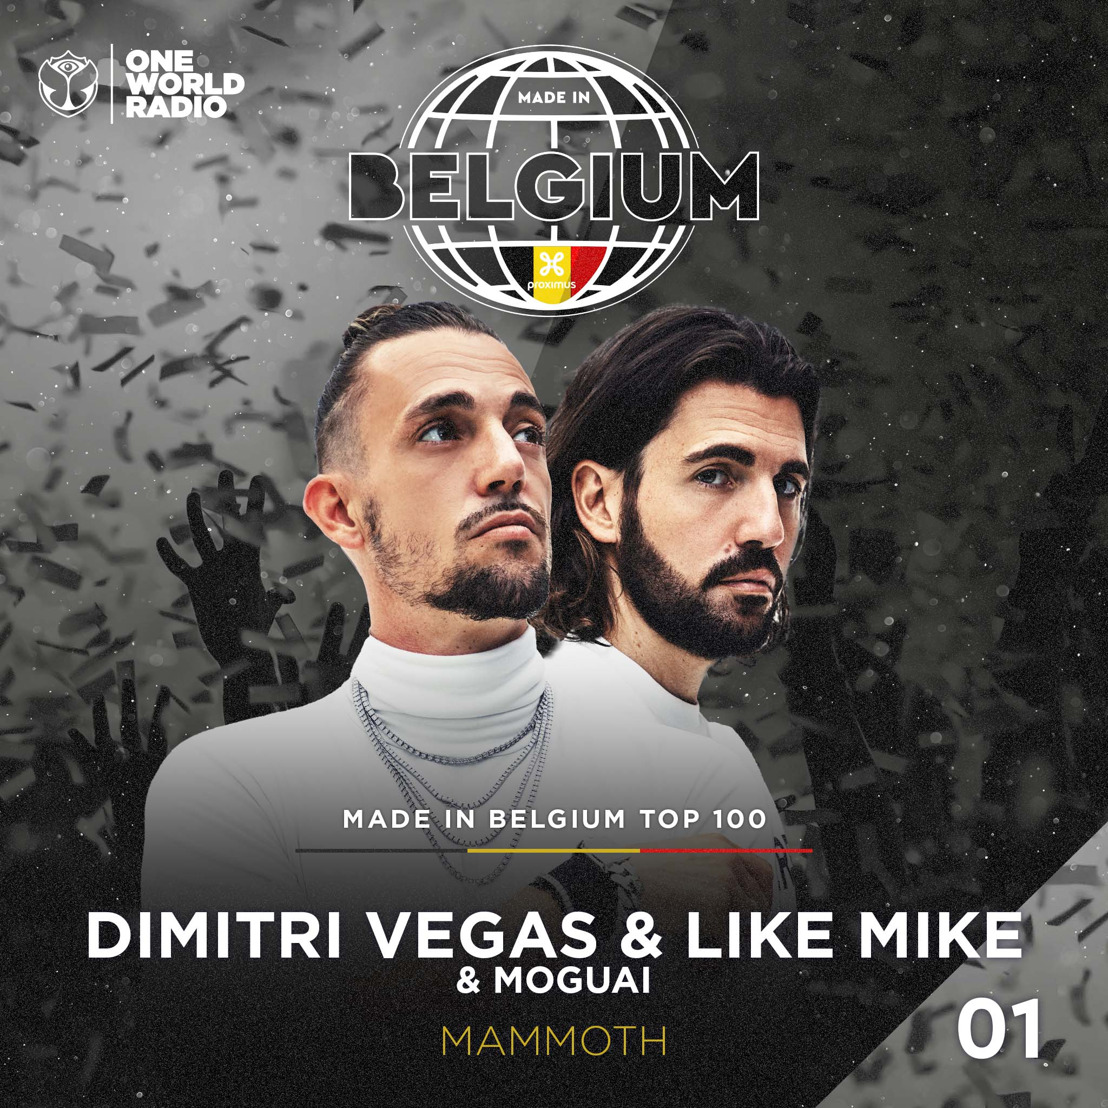 ‘Mammoth’ by Dimitri Vegas & Like Mike becomes the number 1 in The Made in Belgium Top 100